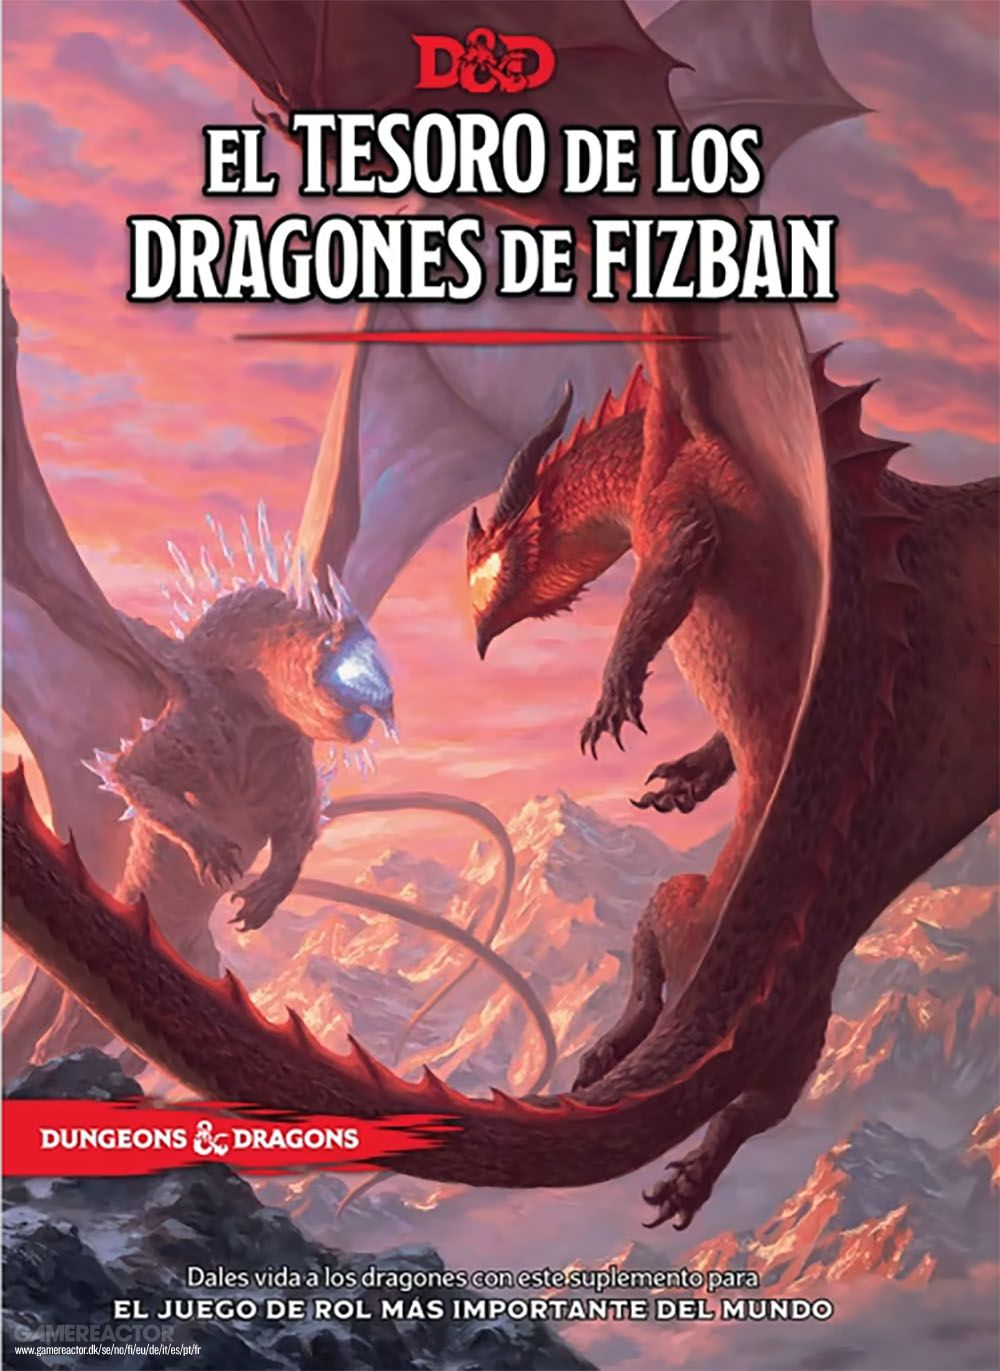 Three new Dungeons & Dragons volumes will be released in Spanish for the first time in 2023